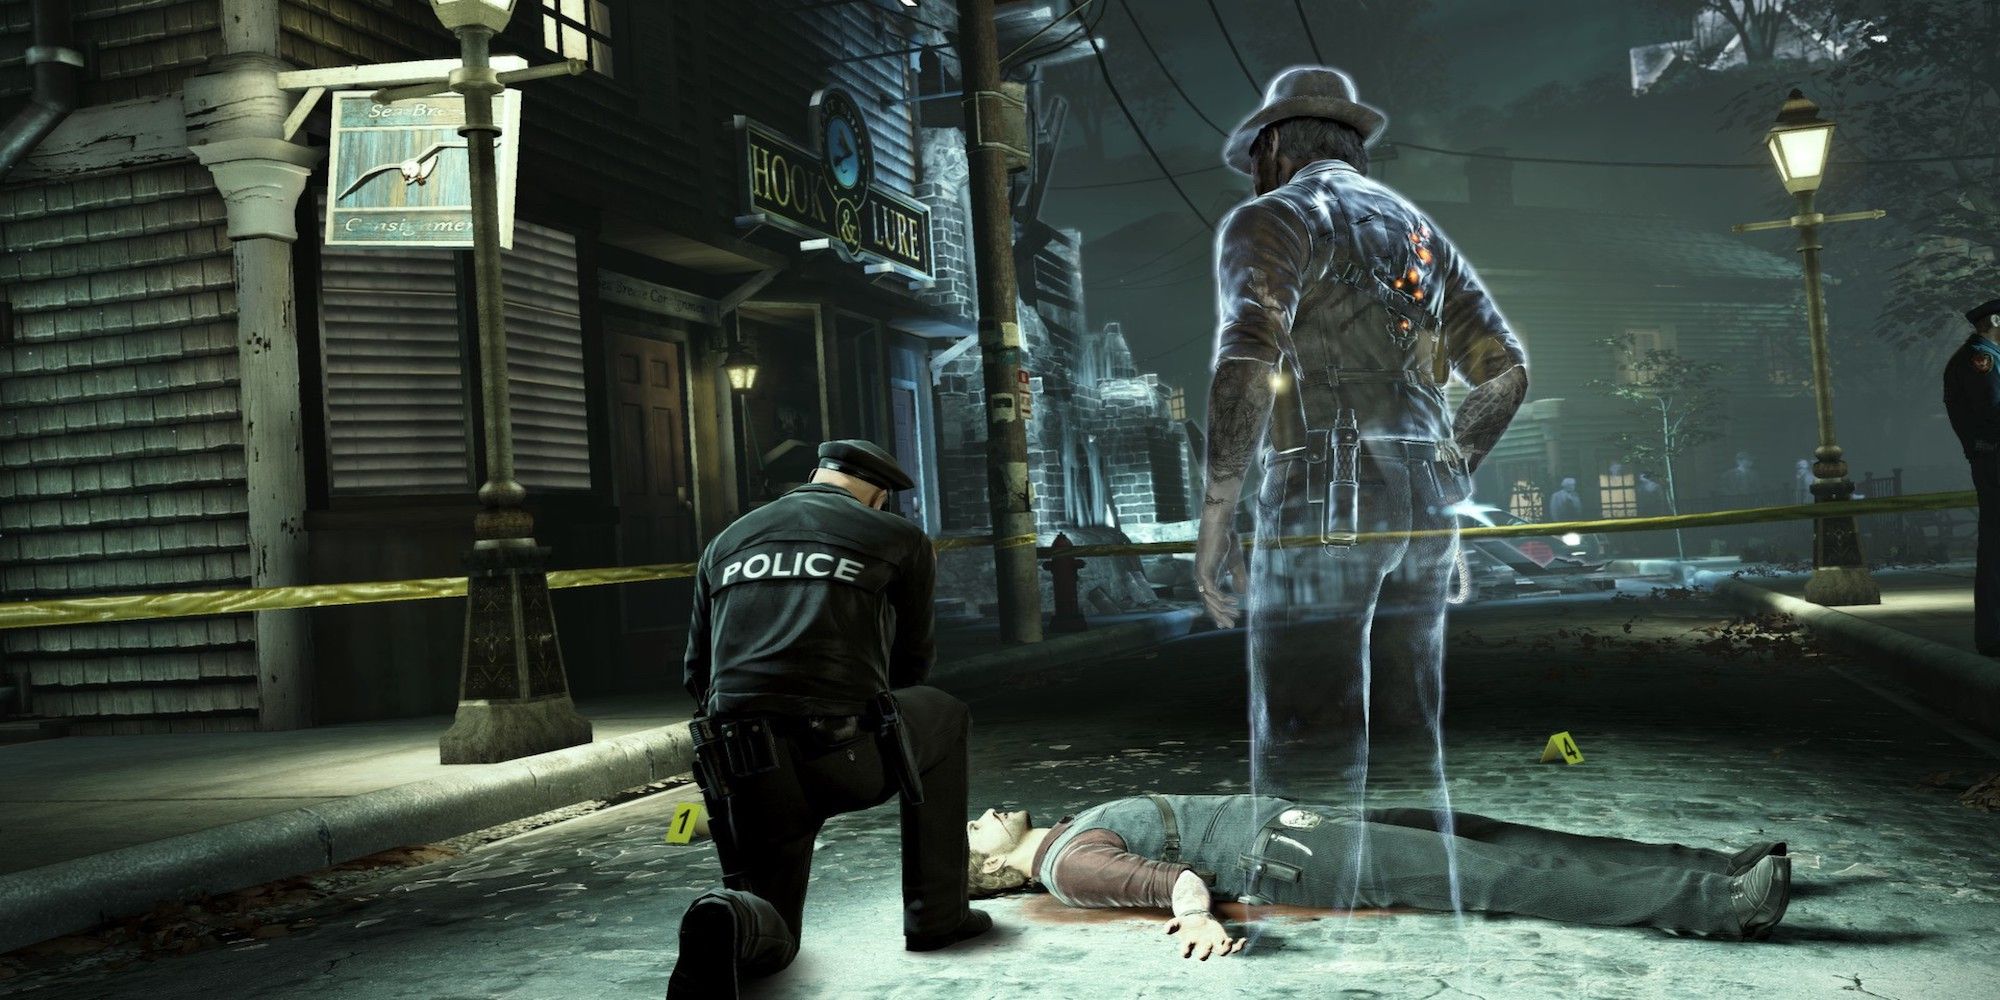 Ronan O'Connor in ghost form investigating a crime scene with an unaware police officer kneeled next to him